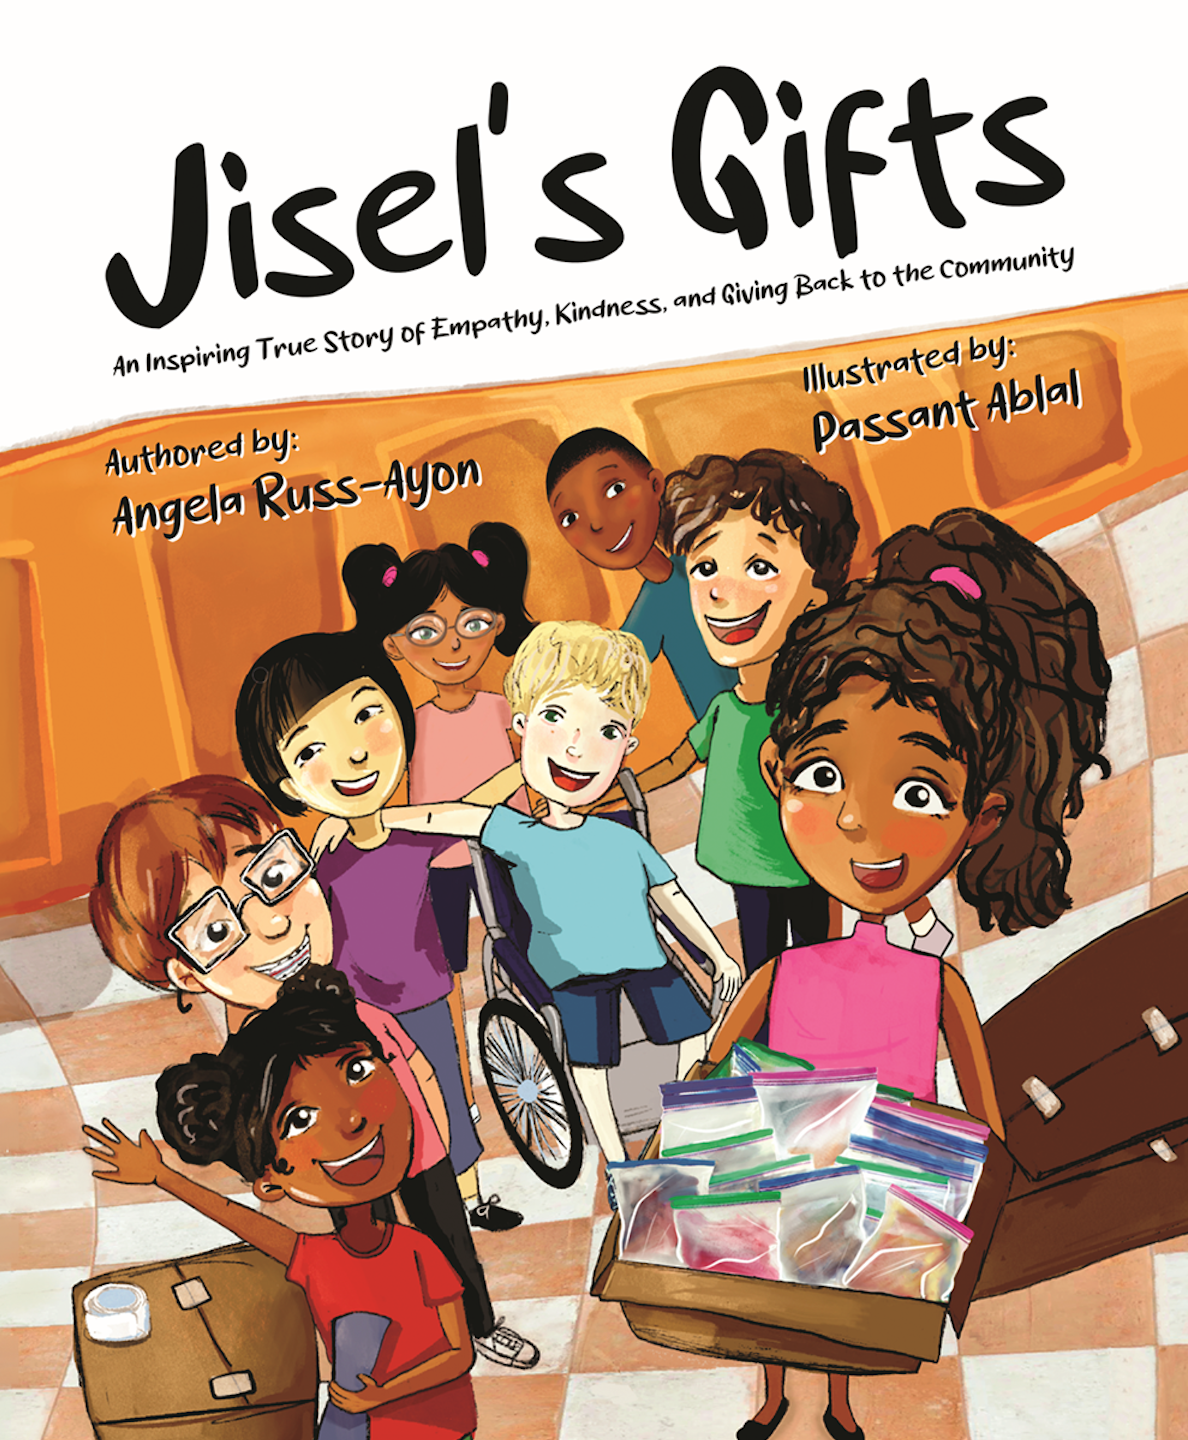 Jisel’s Gifts: An Inspiring True Story of Empathy, Kindness, and Giving Back to the Community